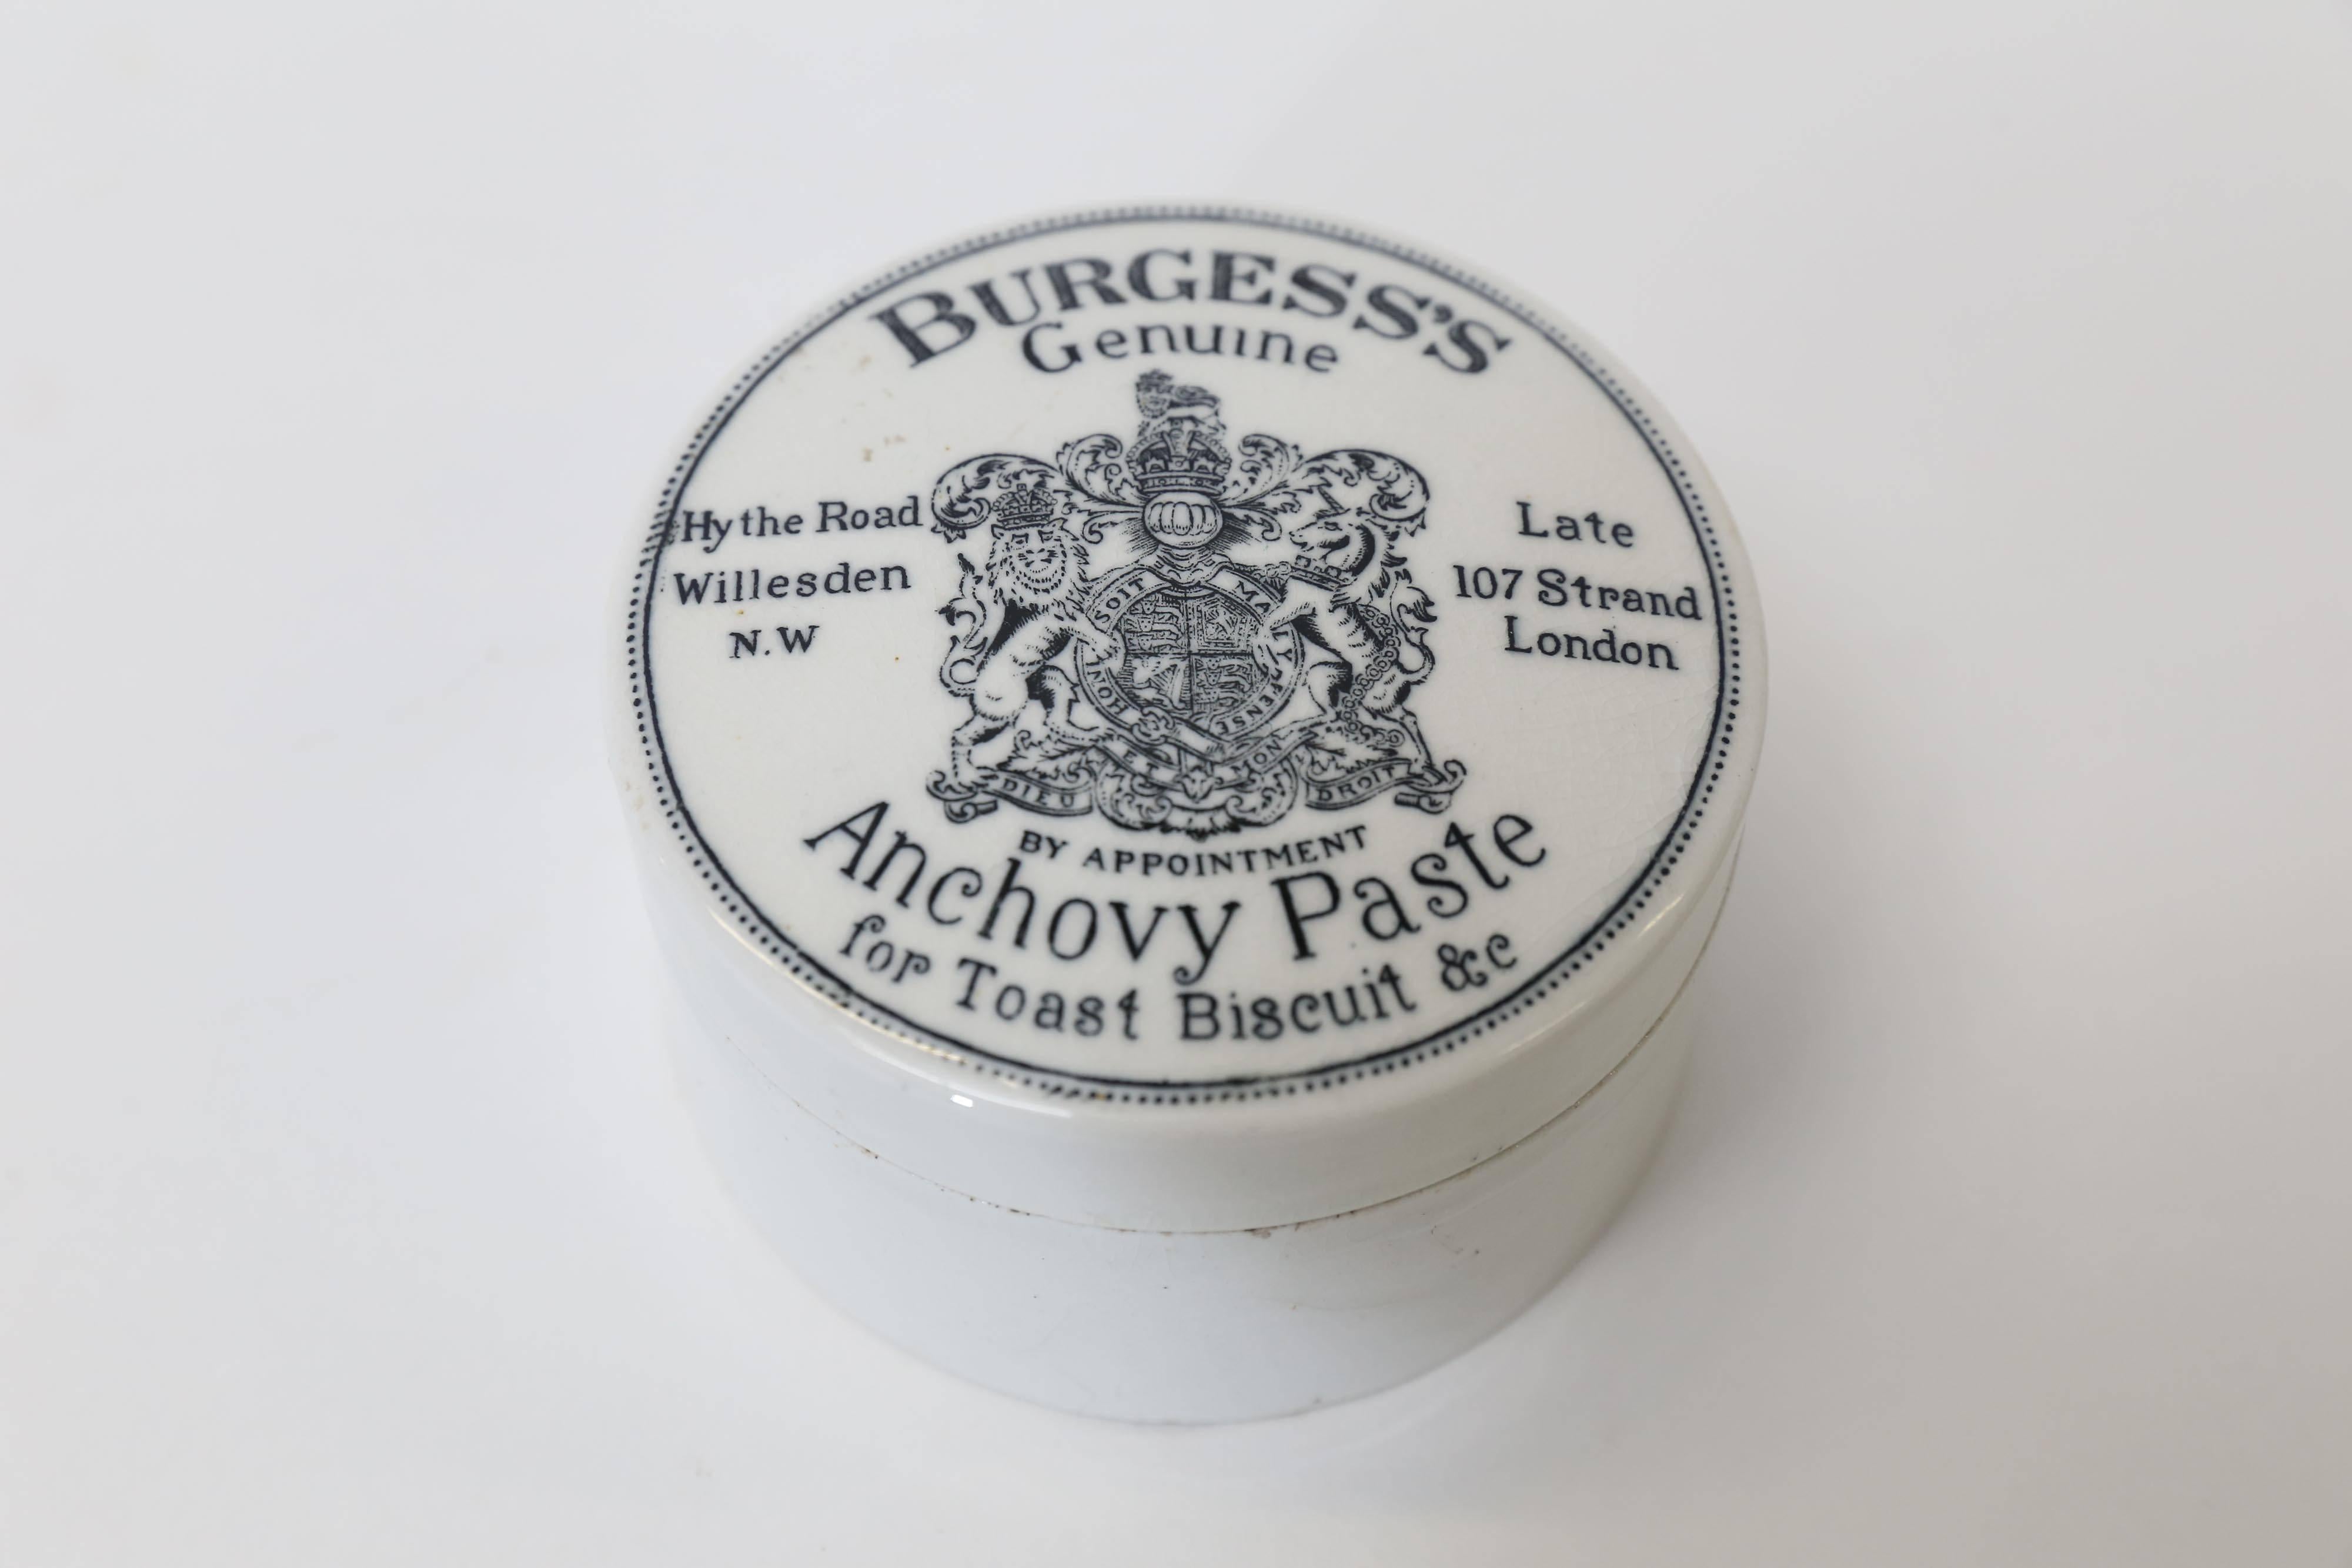 A small pot for Burgess's genuine anchovy paste. For over 200 years, John Burgess and Son made their mark on British popular culture. Thanks to their relentless marketing, their sauces were mentioned in novels, poems, and even tongue twisters, while